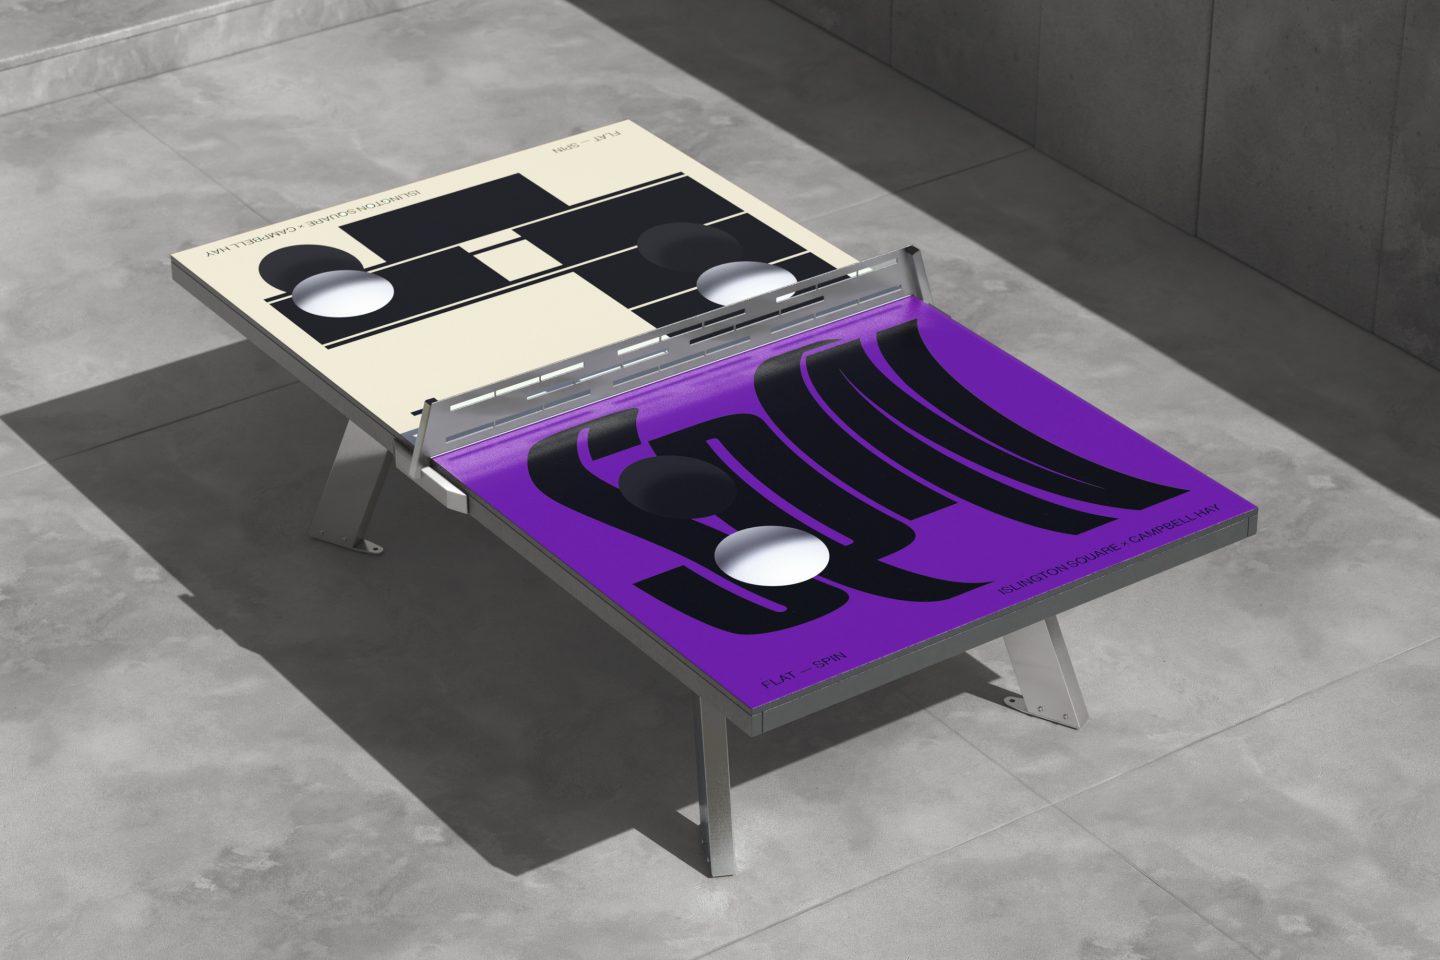 Full-size Art of Ping Pong Table with Campbell Hay